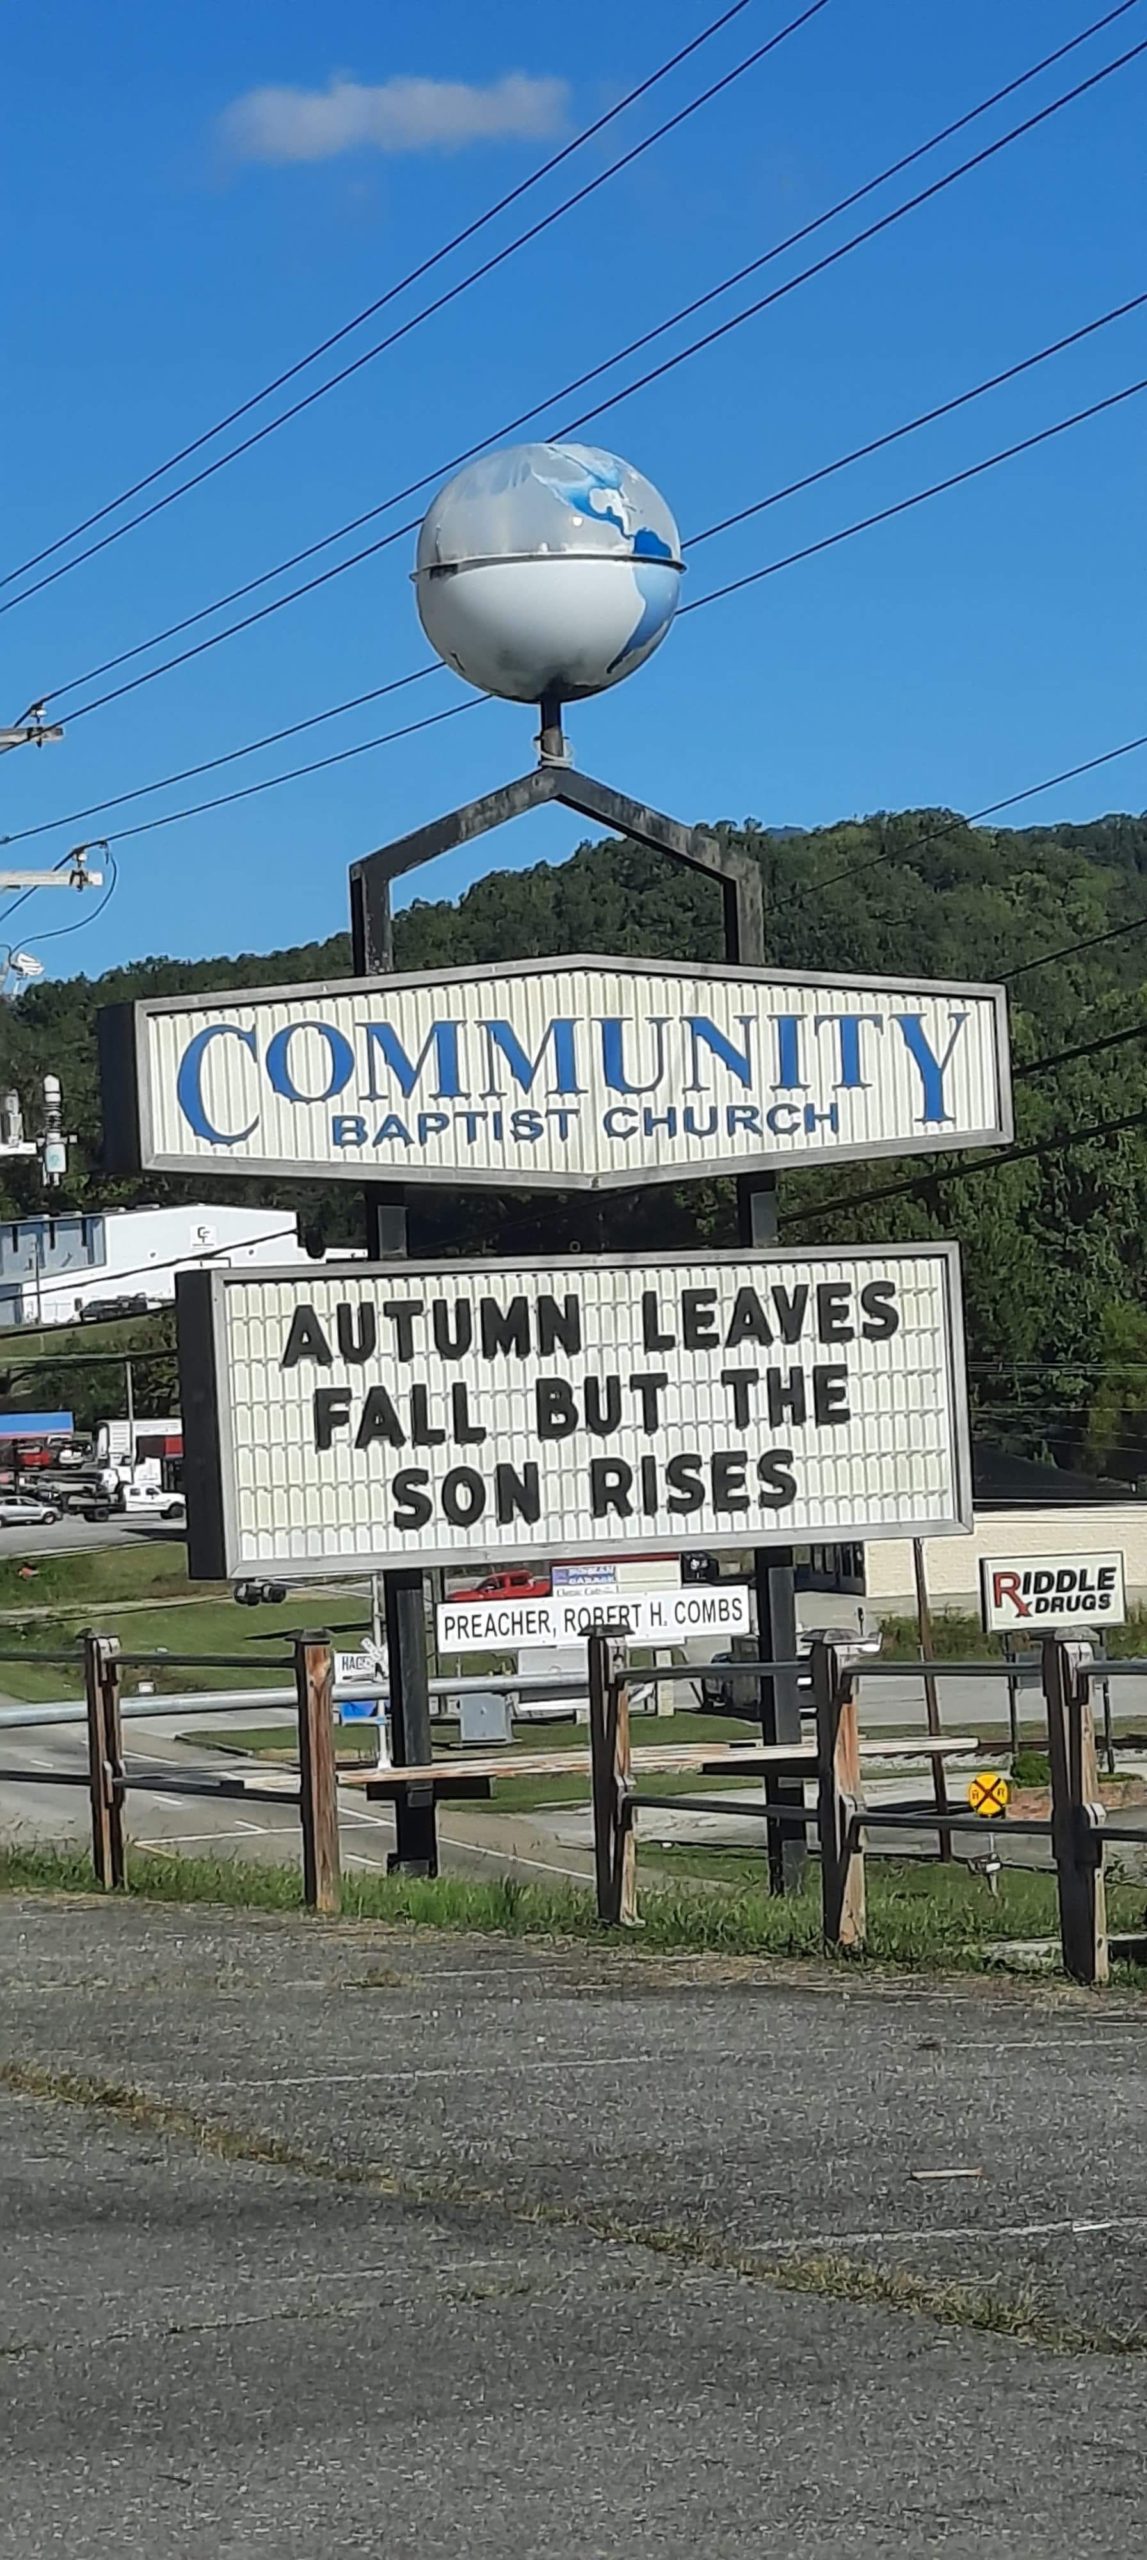 Autumn Leaves Fall Church Sign from Community Baptist Church in Oliver Springs is this week's Church Sign Saturday. (Autumn Leaves Fall But the Son Rises)